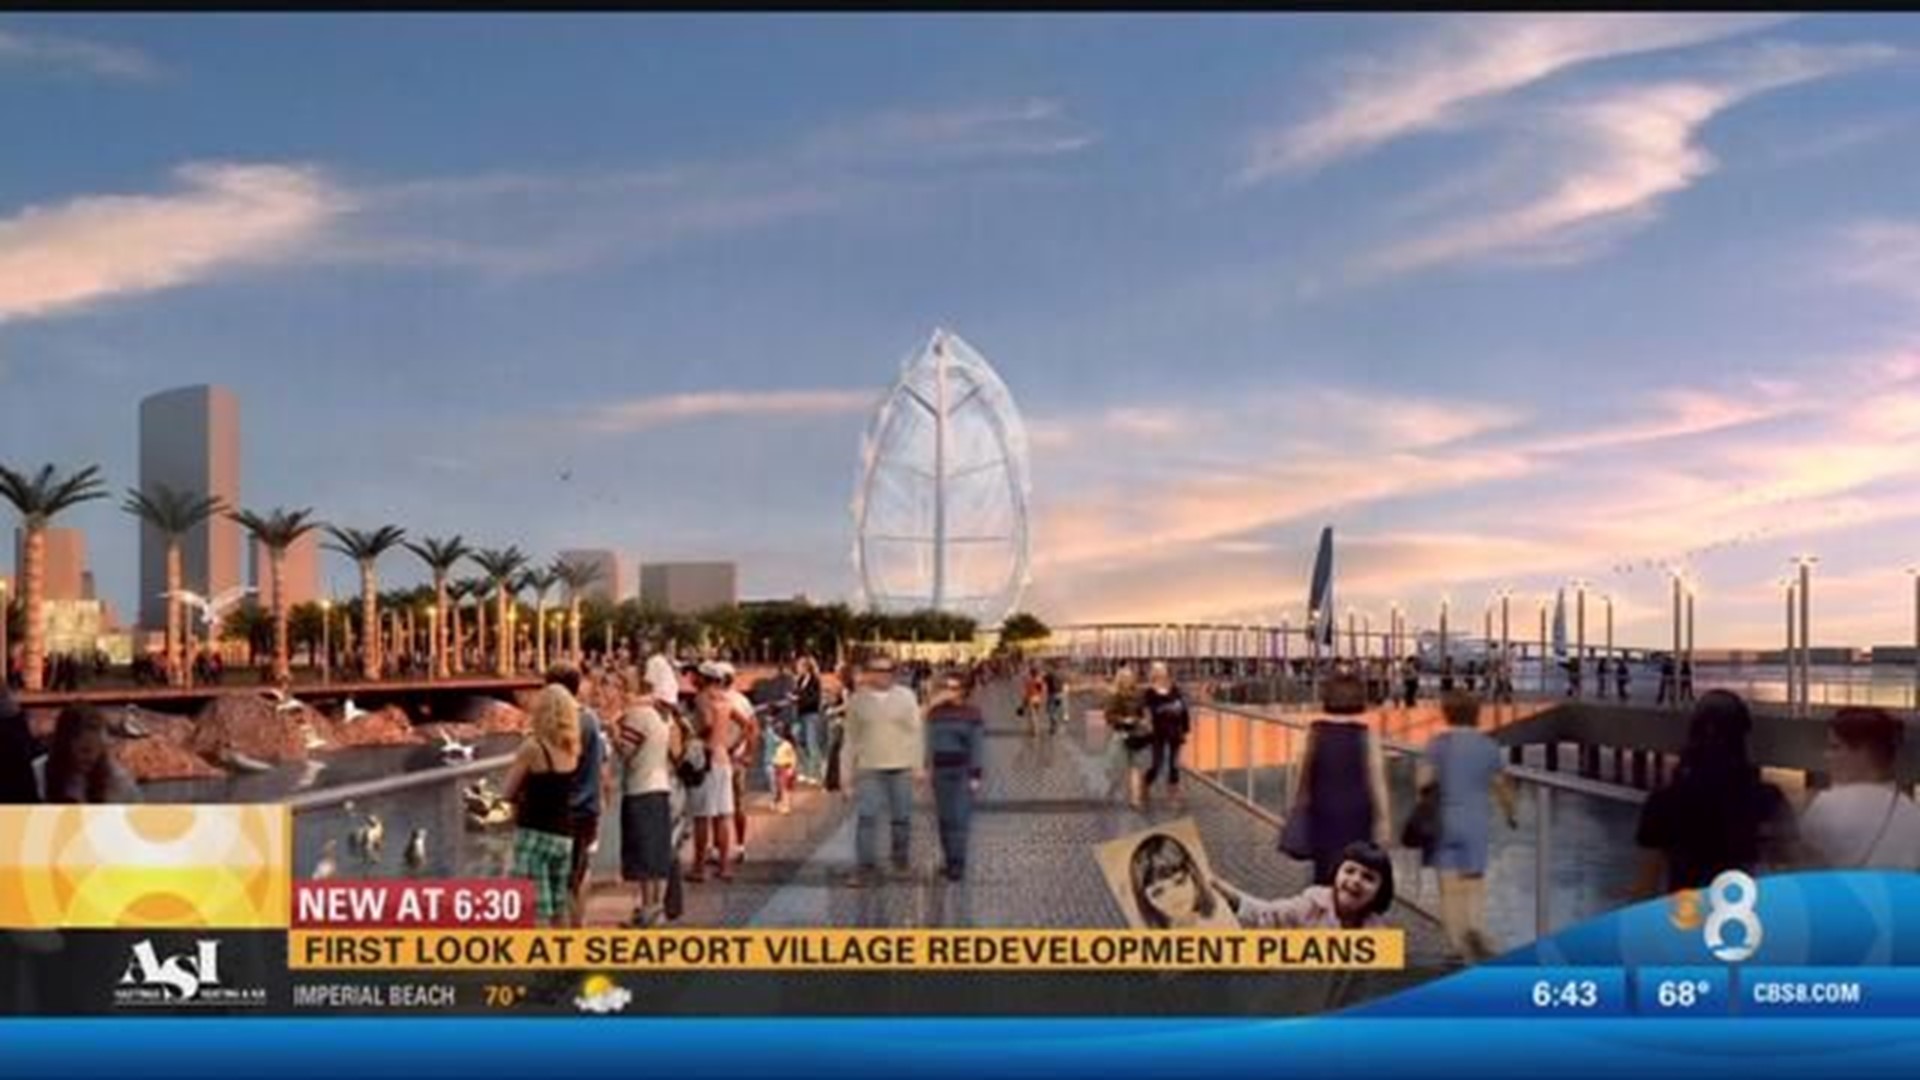 First look at Seaport Village redevelopment plans